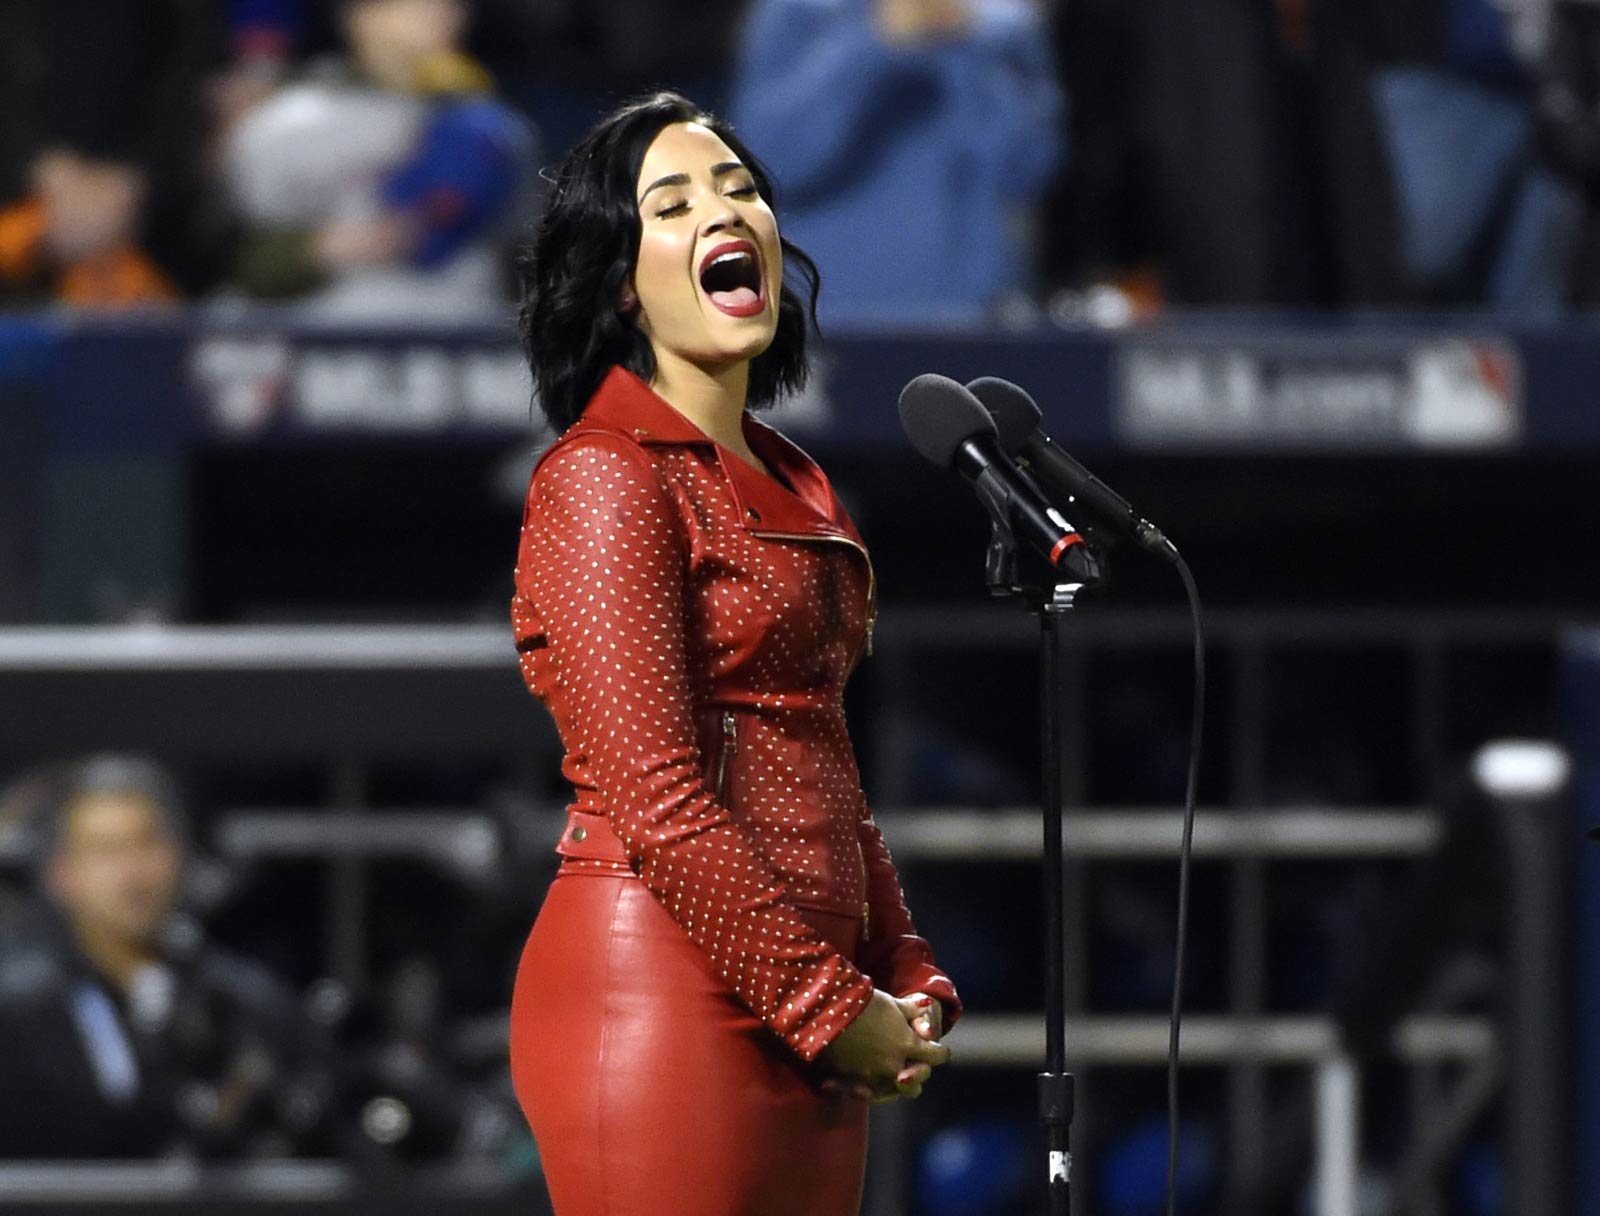 Demi Lovato performing at the World Series